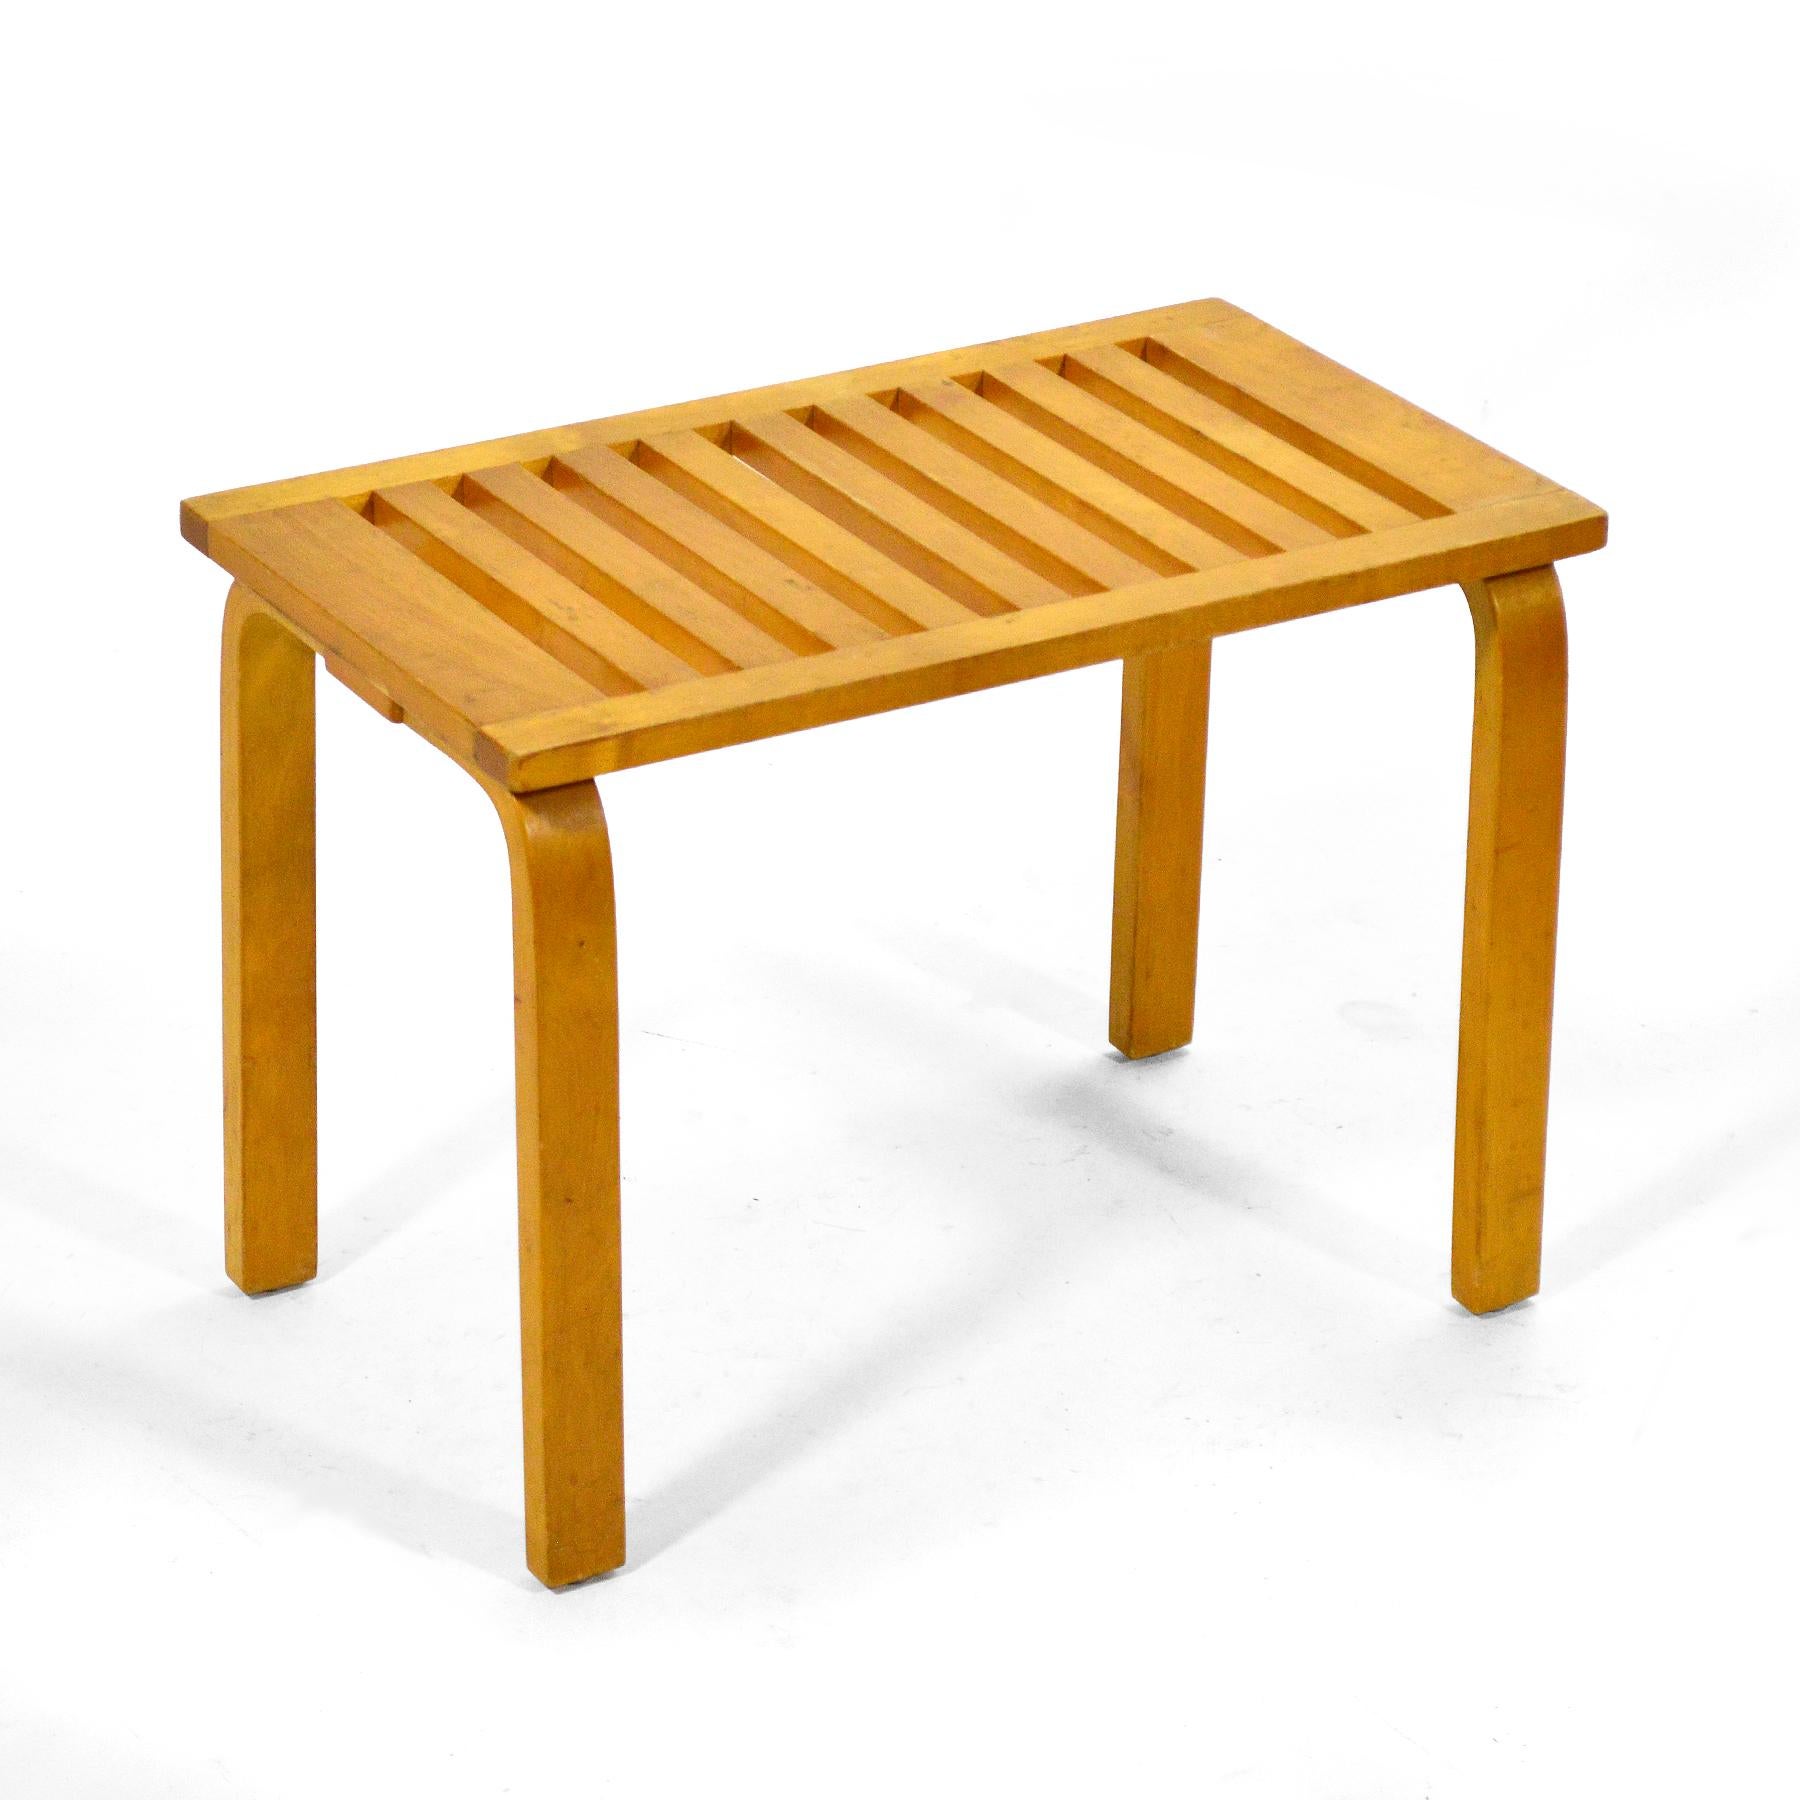 This exceptional example of Allto's slat bench/ table by Artek dates to circa 1948 and was sold at Chicago's landmark modern design store Baldwin Kingrey. It has a beautiful patina from age and retains its original label on the underside.